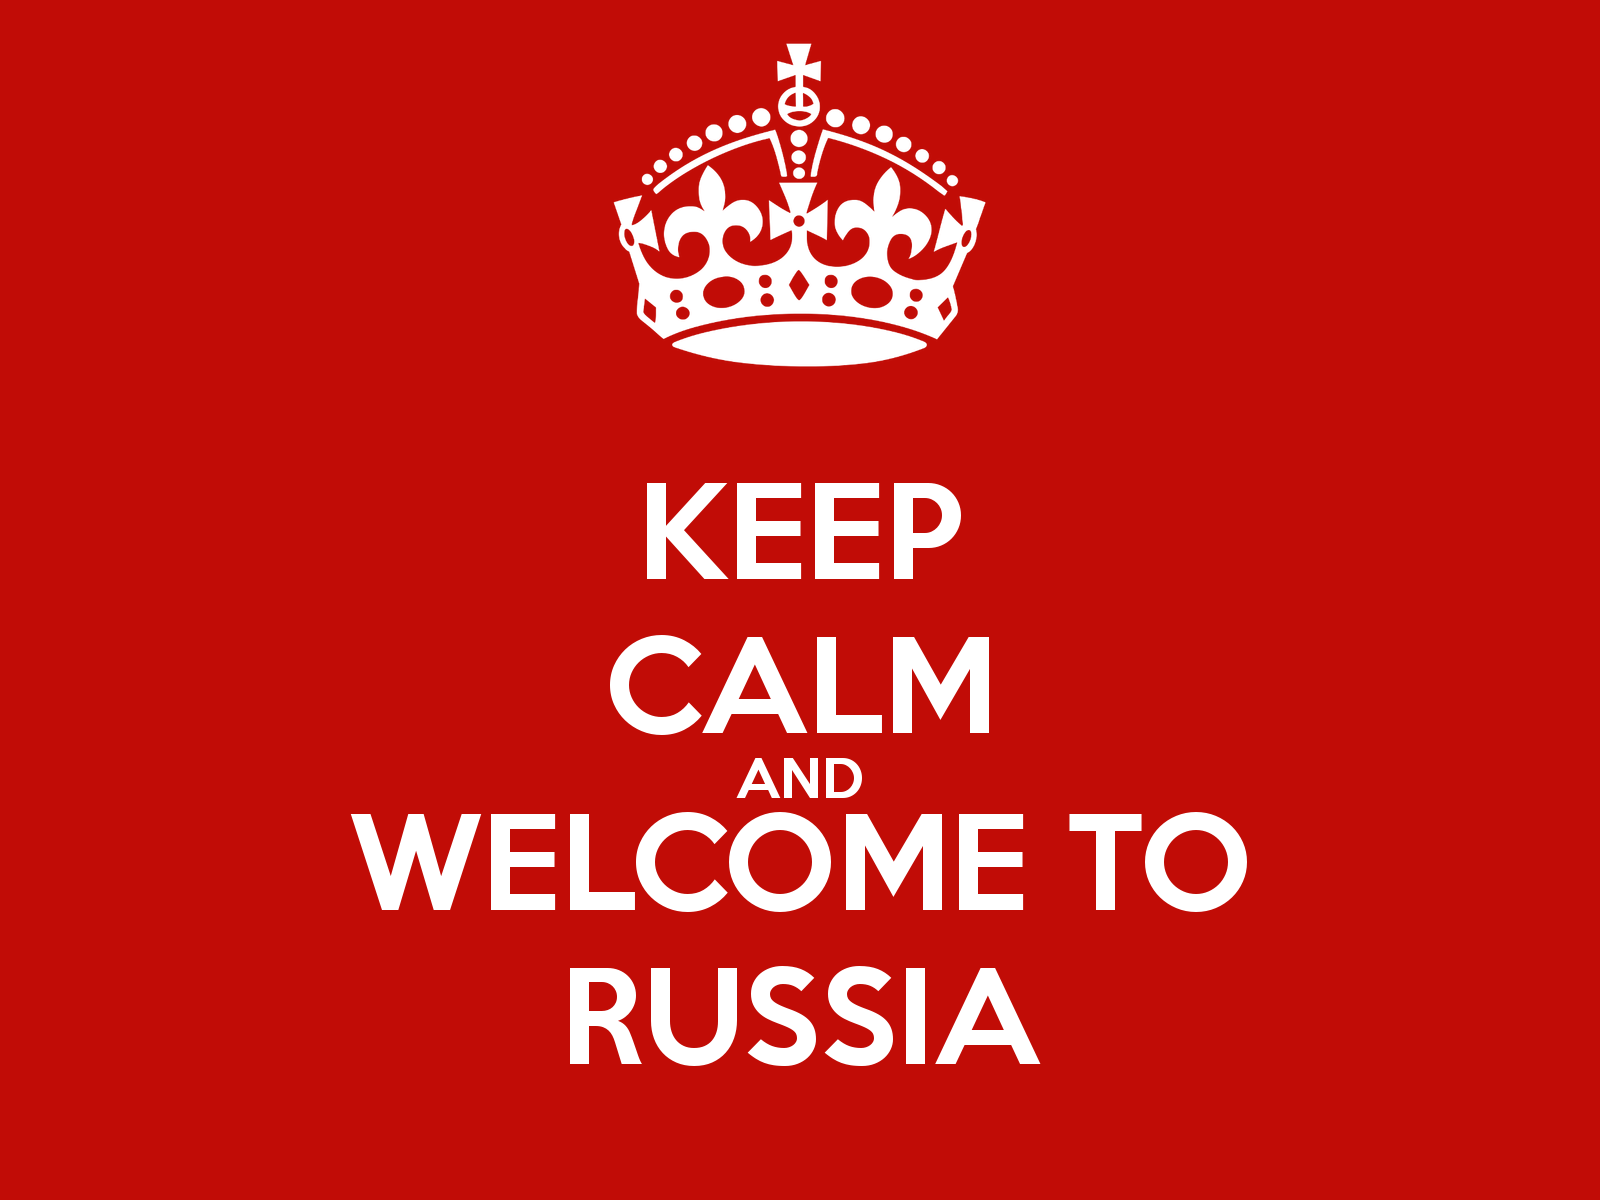 Welcome project. Россия Welcome. Welcome to Russia. Надпись Welcome to Russia. Keep Calm and Welcome to Russia.